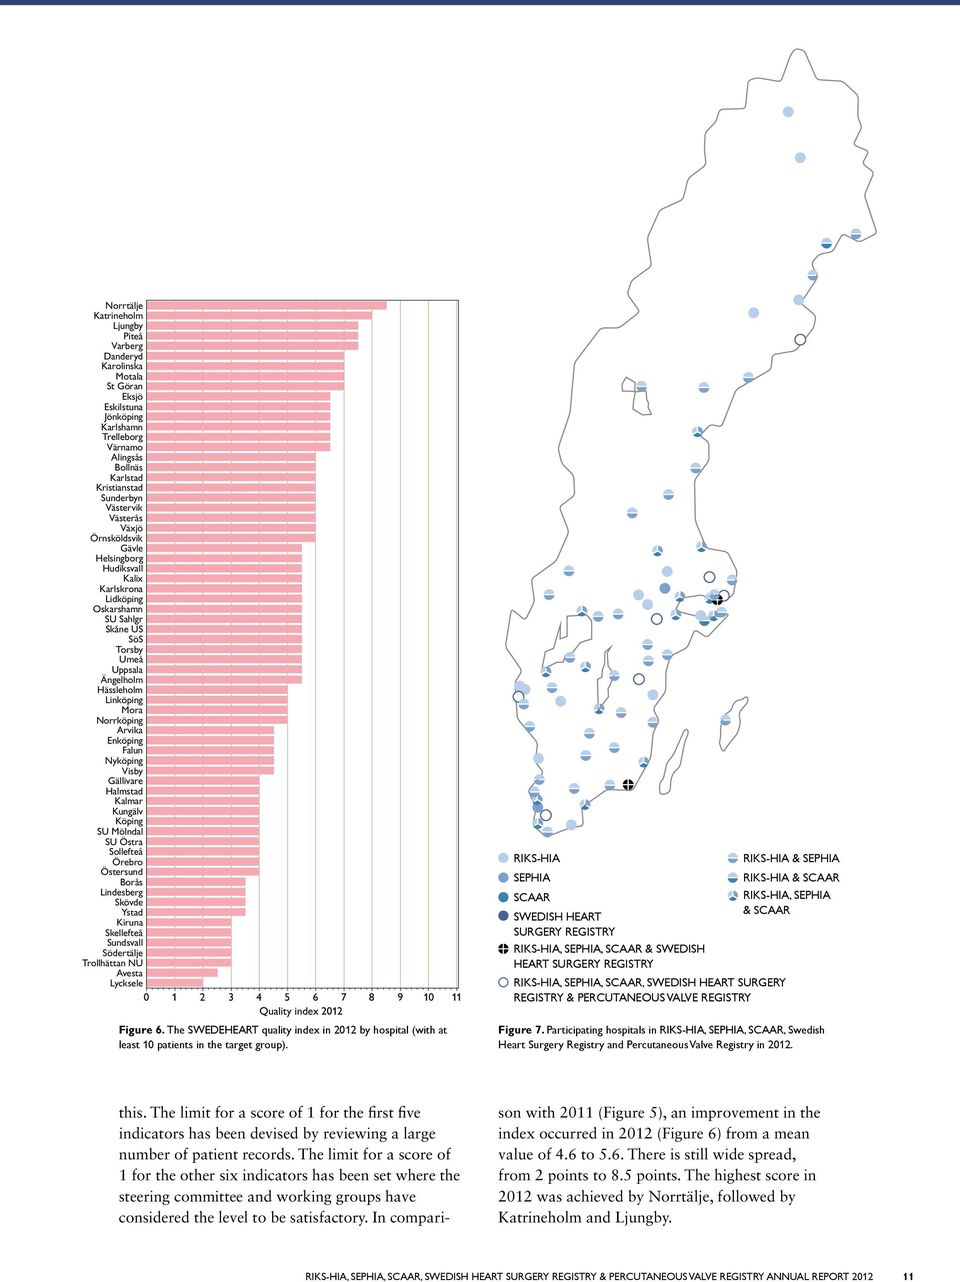 Trollhättan NU Avesta Lycksele 1 3 4 5 6 7 8 9 1 11 Quality index 1 Figure 6. The SWEDEHEART quality index in 1 by hospital (with at least 1 patients in the target group).